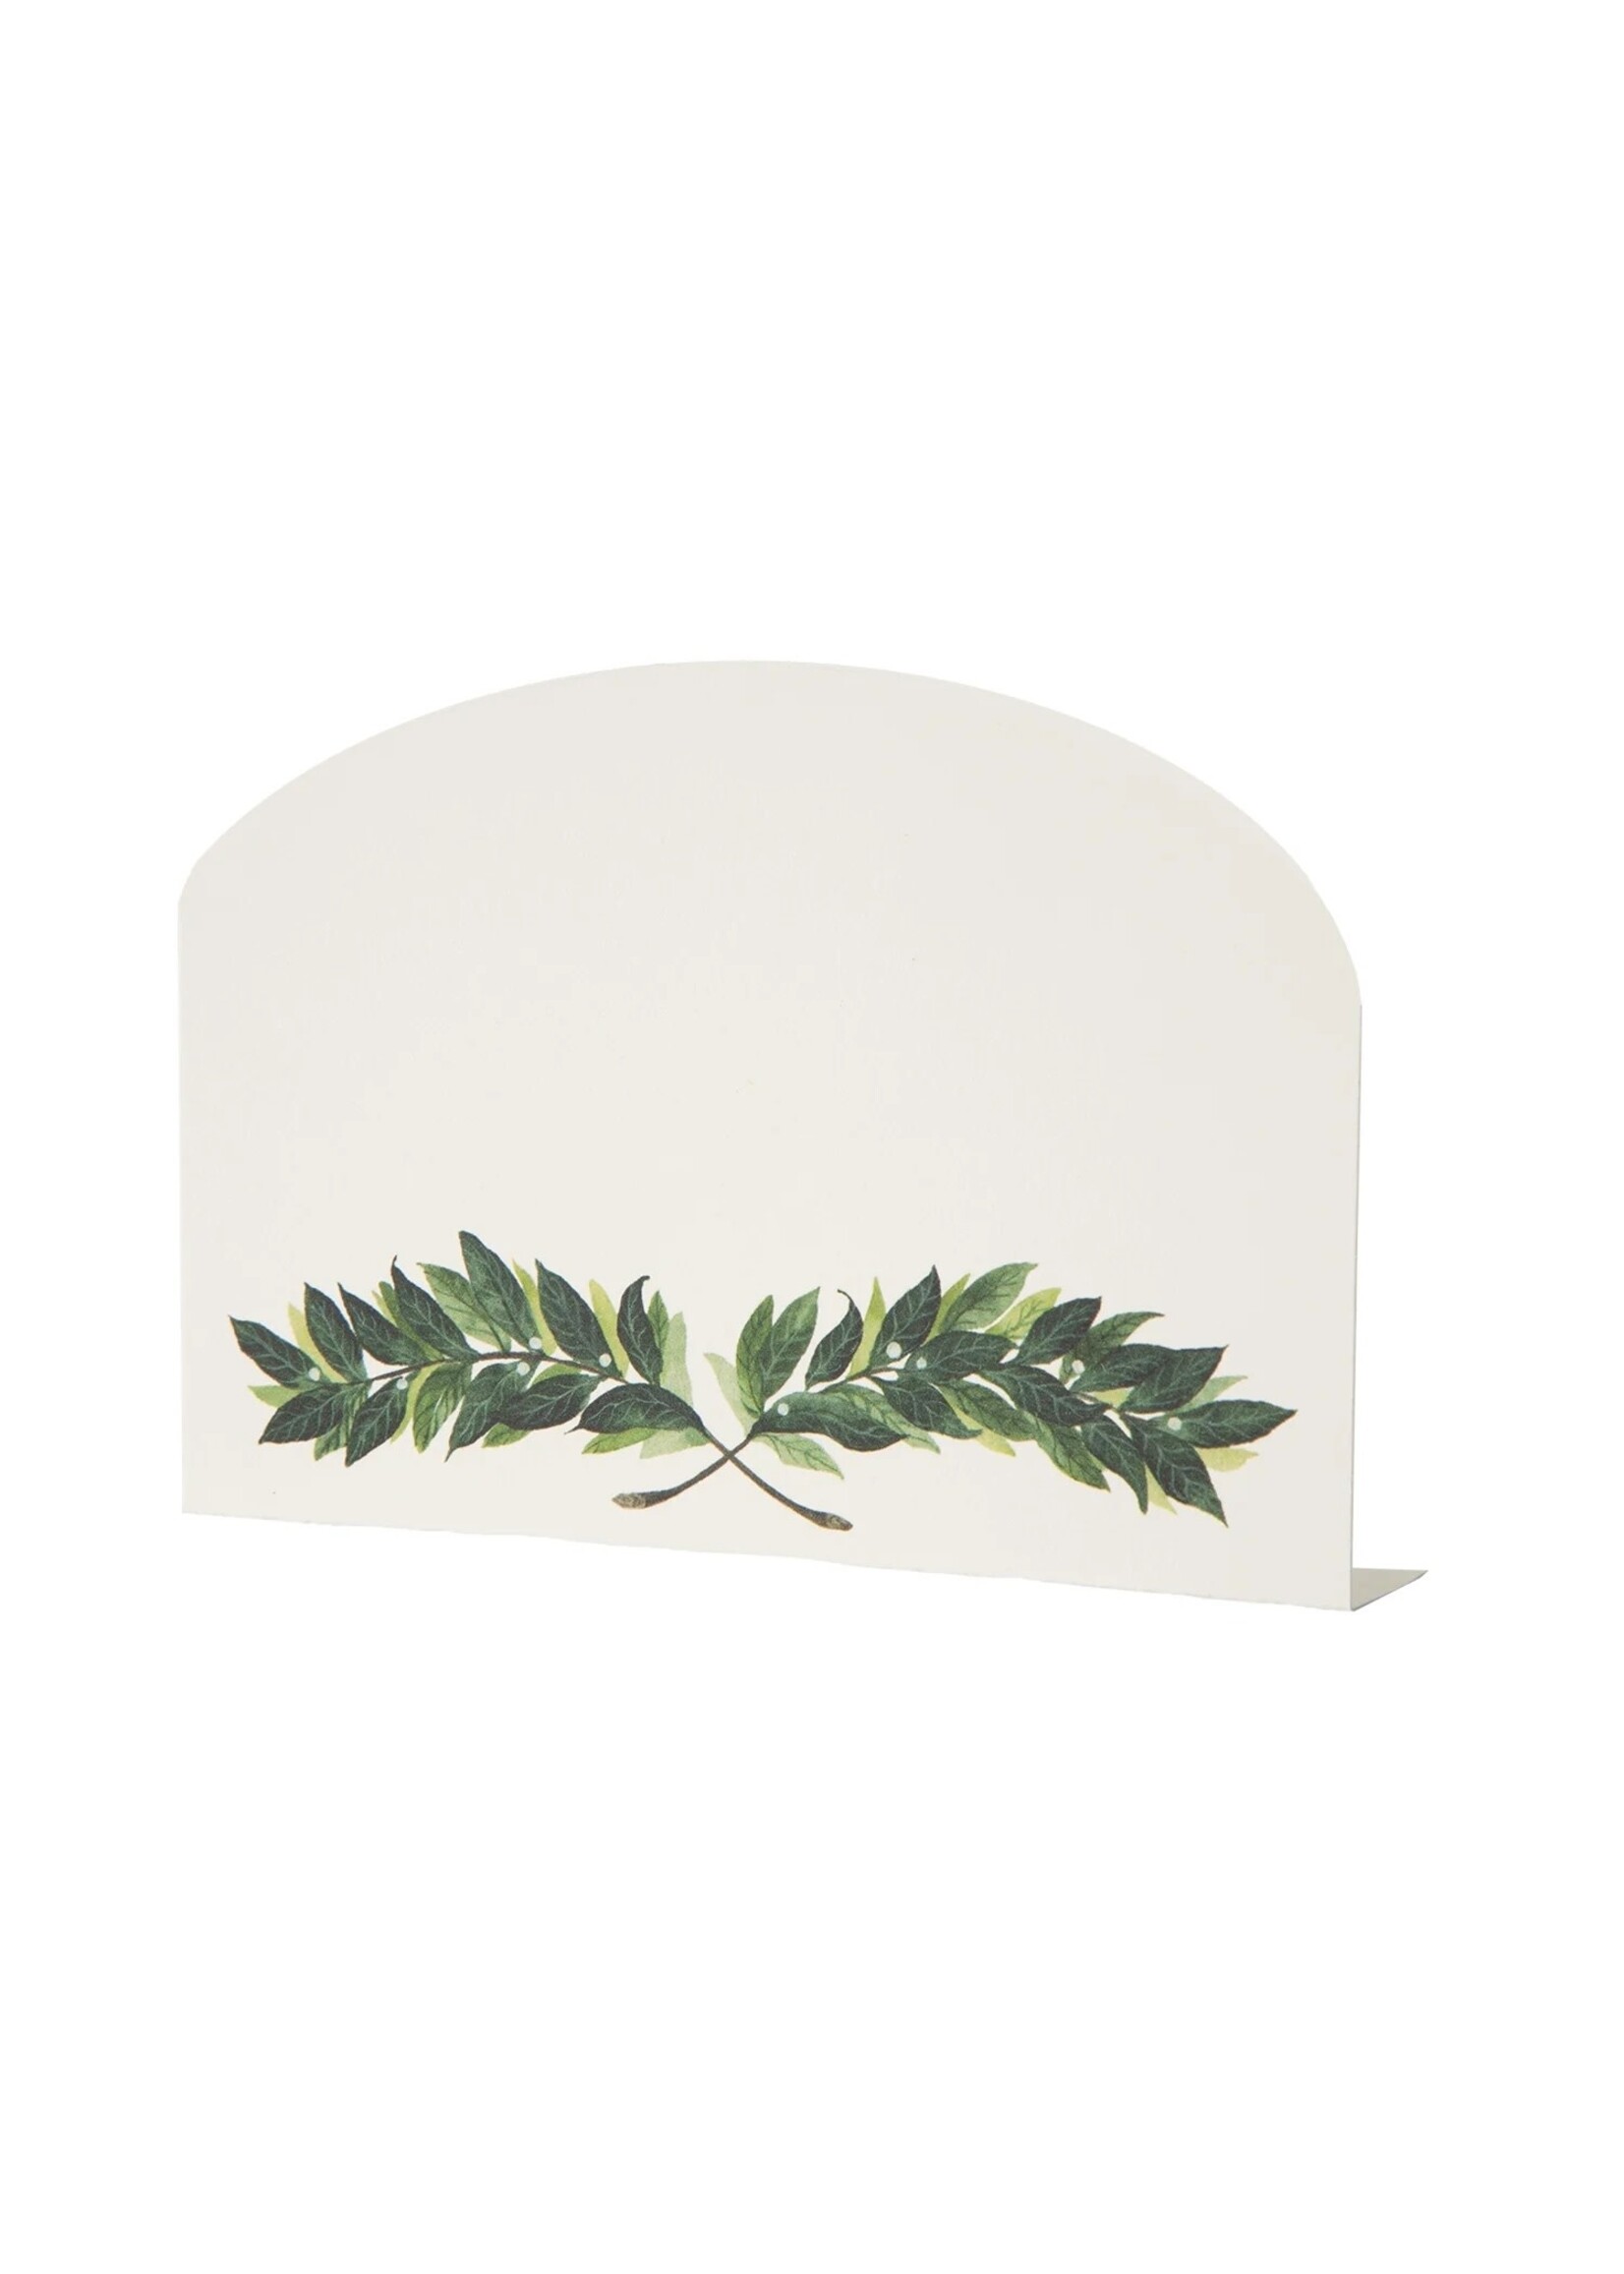 Hester & Cook Place Cards - Laurel (pack of 12)